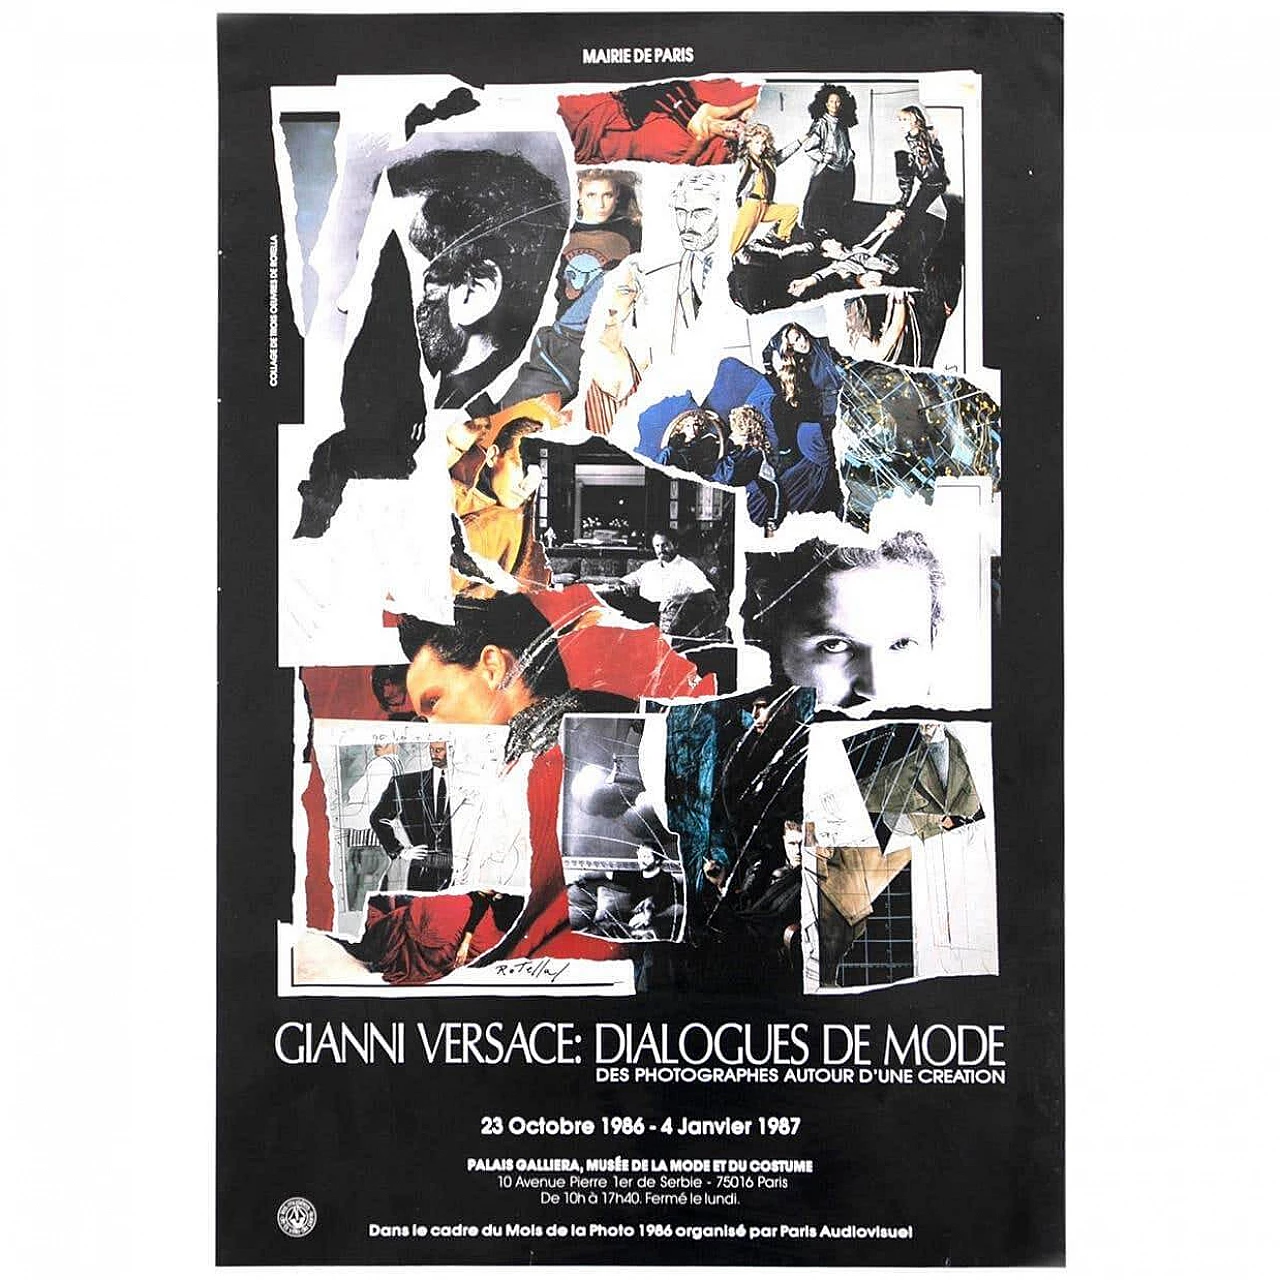 Poster by Mimmo Rotella for Gianni Versace's exhibition Dialogue du Mode, 1987 1